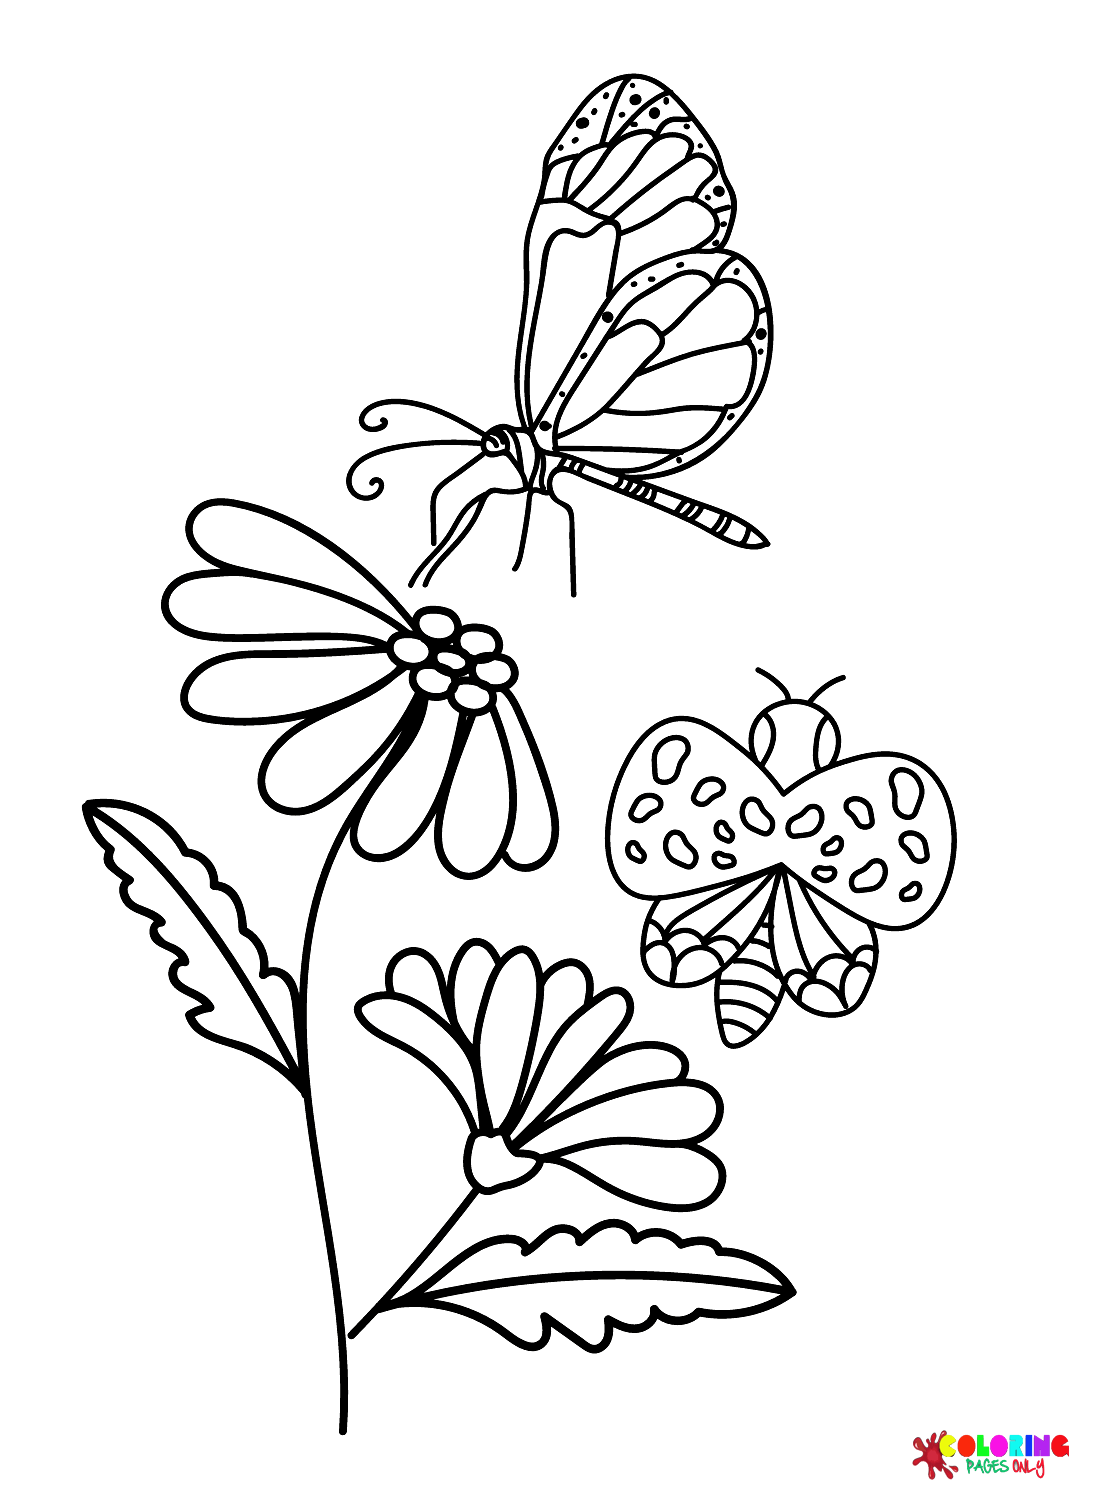 Daisy Flower with Butterfly Coloring Page